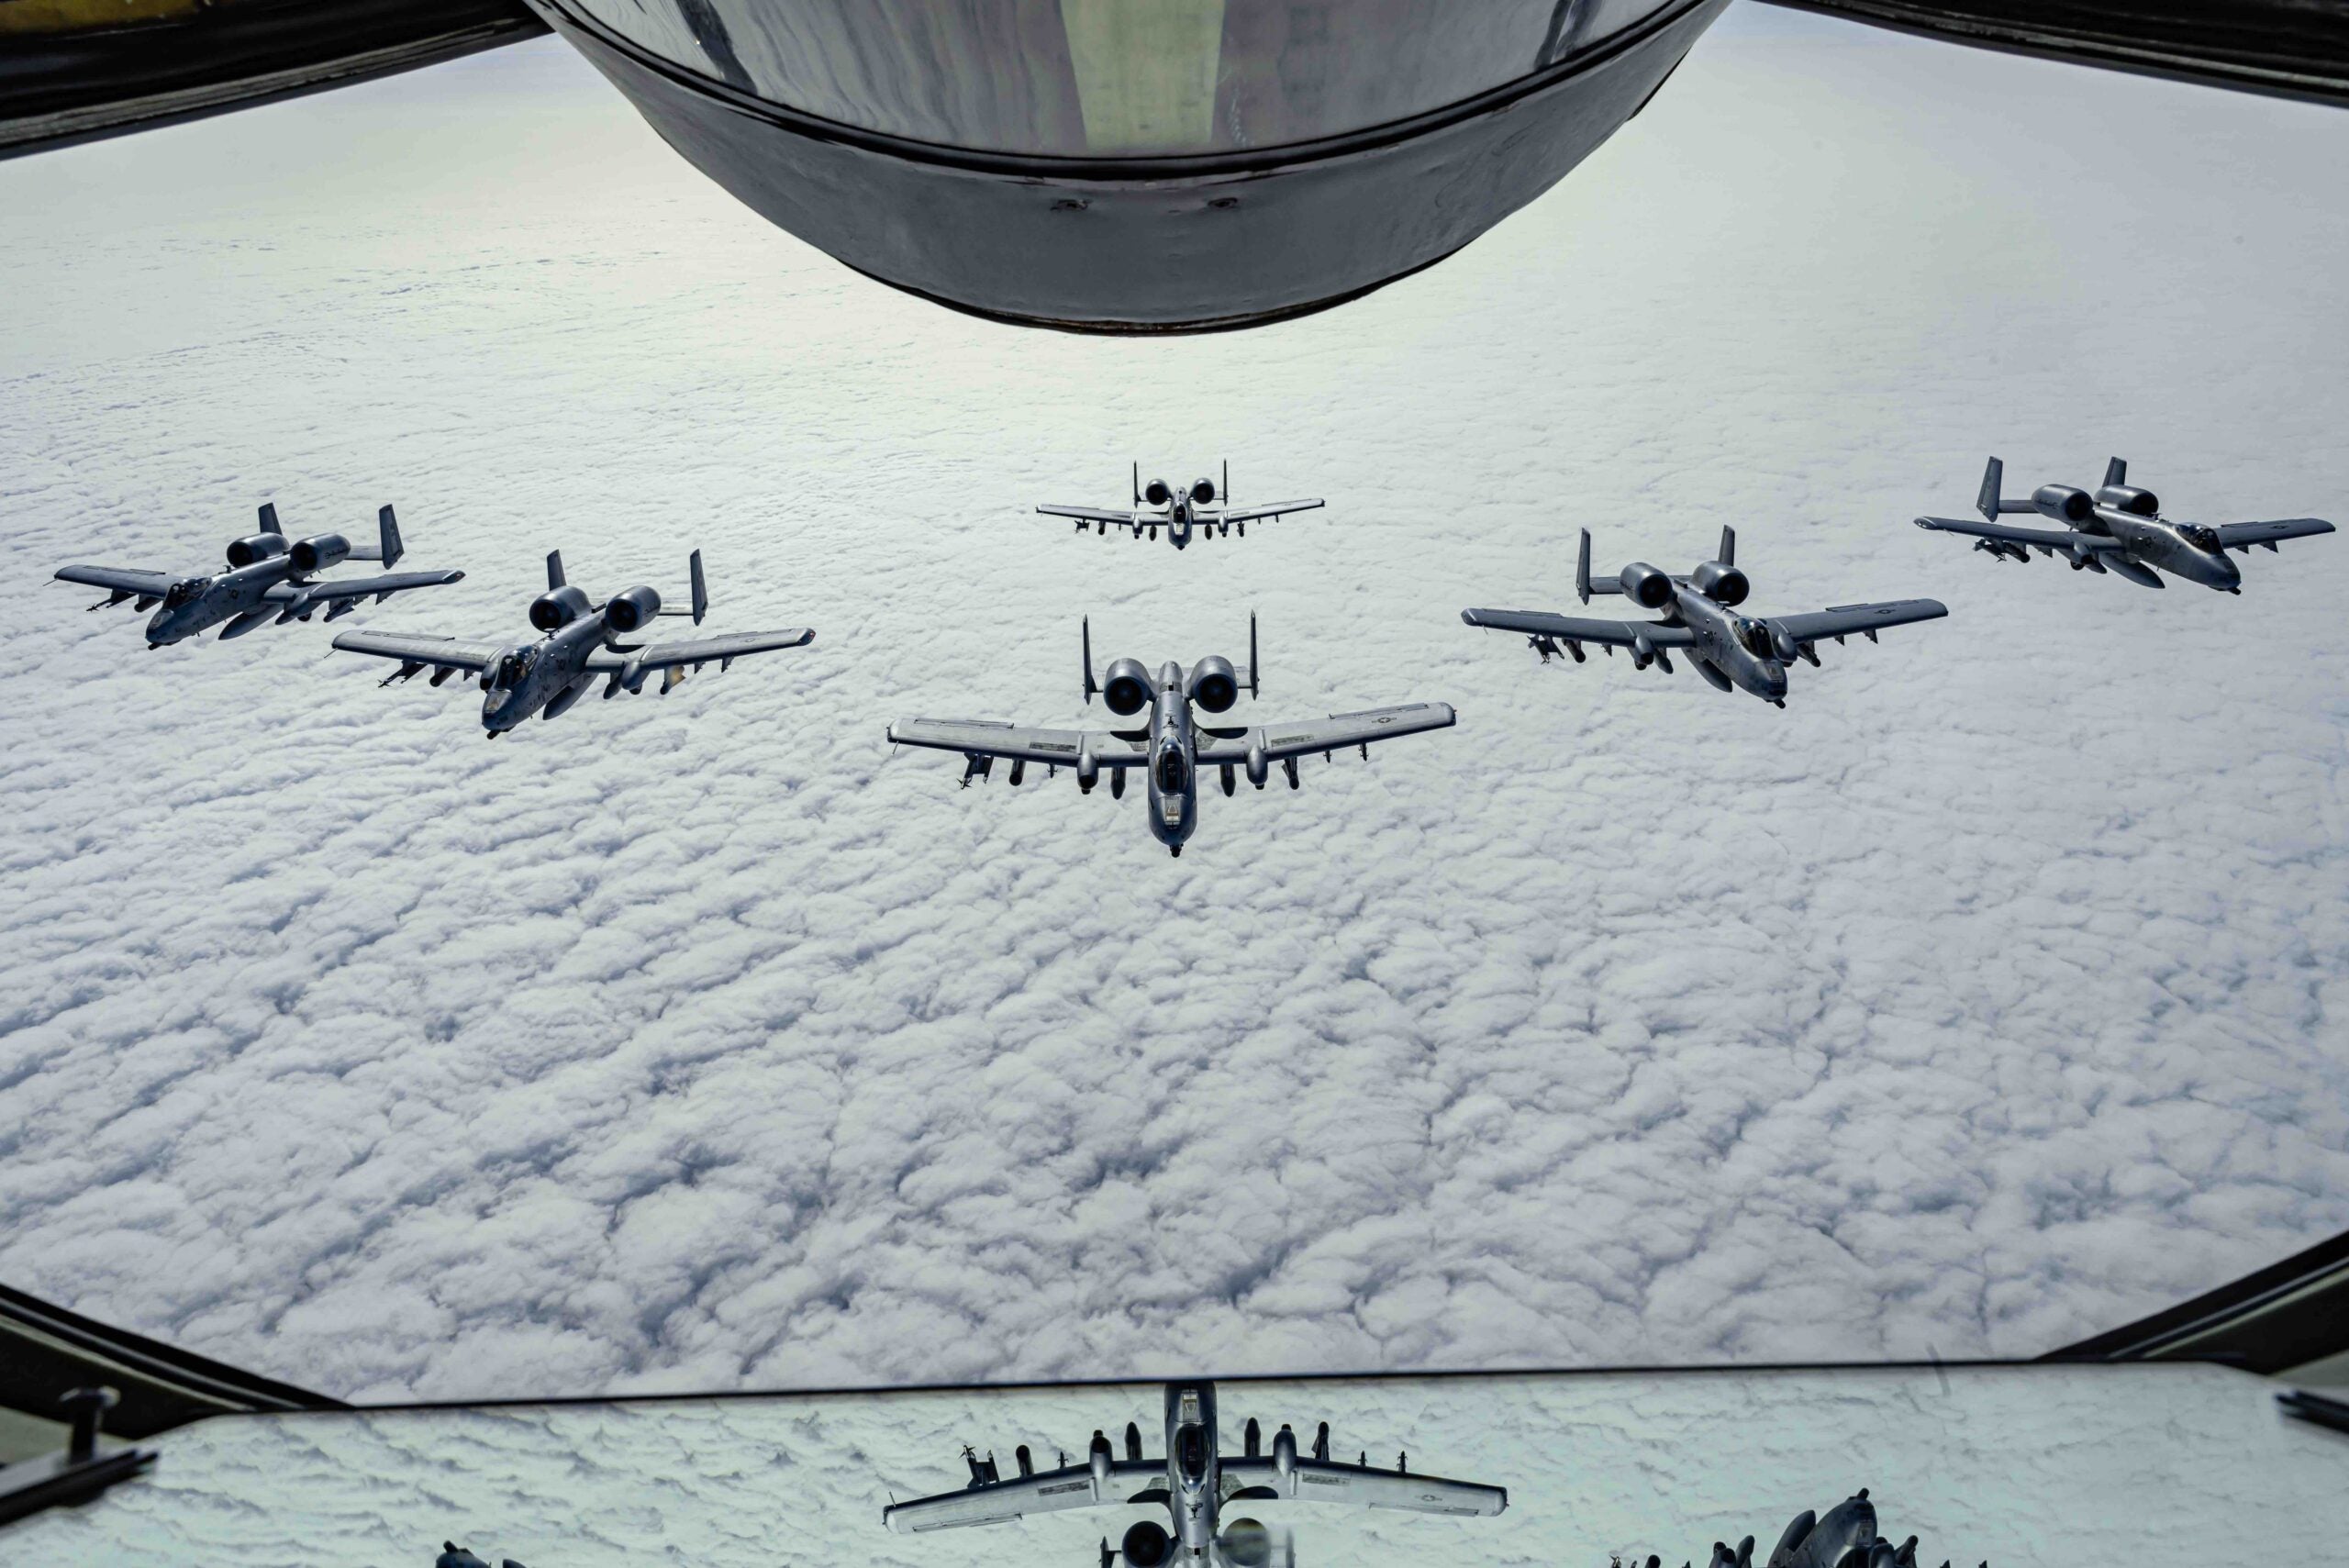 A U.S. Air Force A-10 Thunderbolt II aircraft assigned to the 127th Wing, Michigan National Guard, fly in formation behind a KC-135 Stratotanker assigned to the 128th Air Refueling Wing, Wisconsin National Guard, June 5, 2023. Exercise Air Defender integrates both U.S. and Allied air-power to defend shared values, while leveraging and strengthening vital partnerships to deter aggression around the world. (U.S. Air National Guard photo by Master Sgt. Lauren Kmiec)